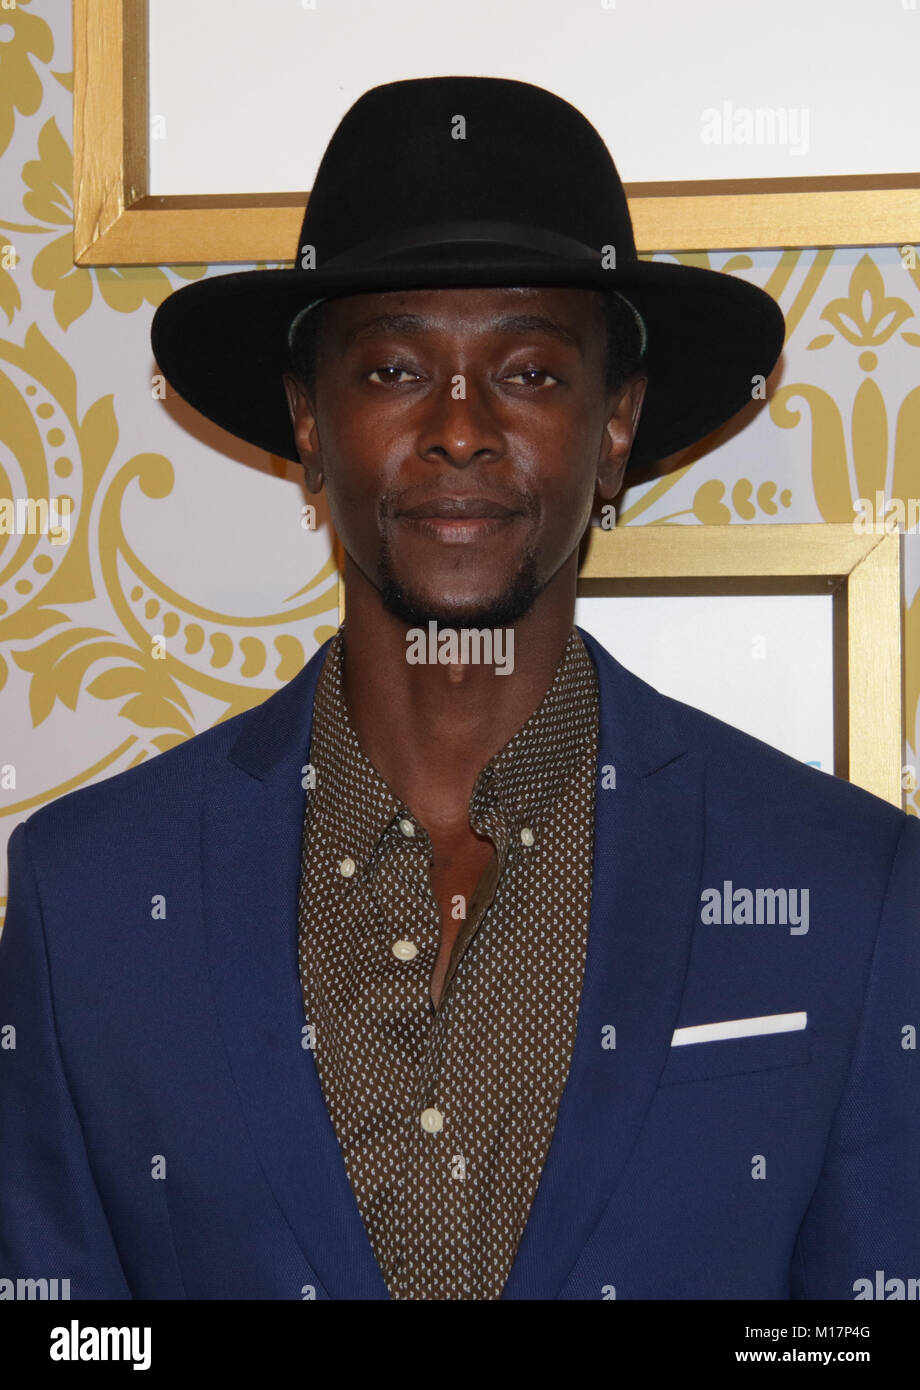 New York, NY, USA. 27th Jan, 2018. Edi Gathegi at 2018 Roc Nation The Brunch at One World Trade Center on January 27, 2018 in New York City. Credit: Diego Corredor/Media Punch/Alamy Live News Stock Photo